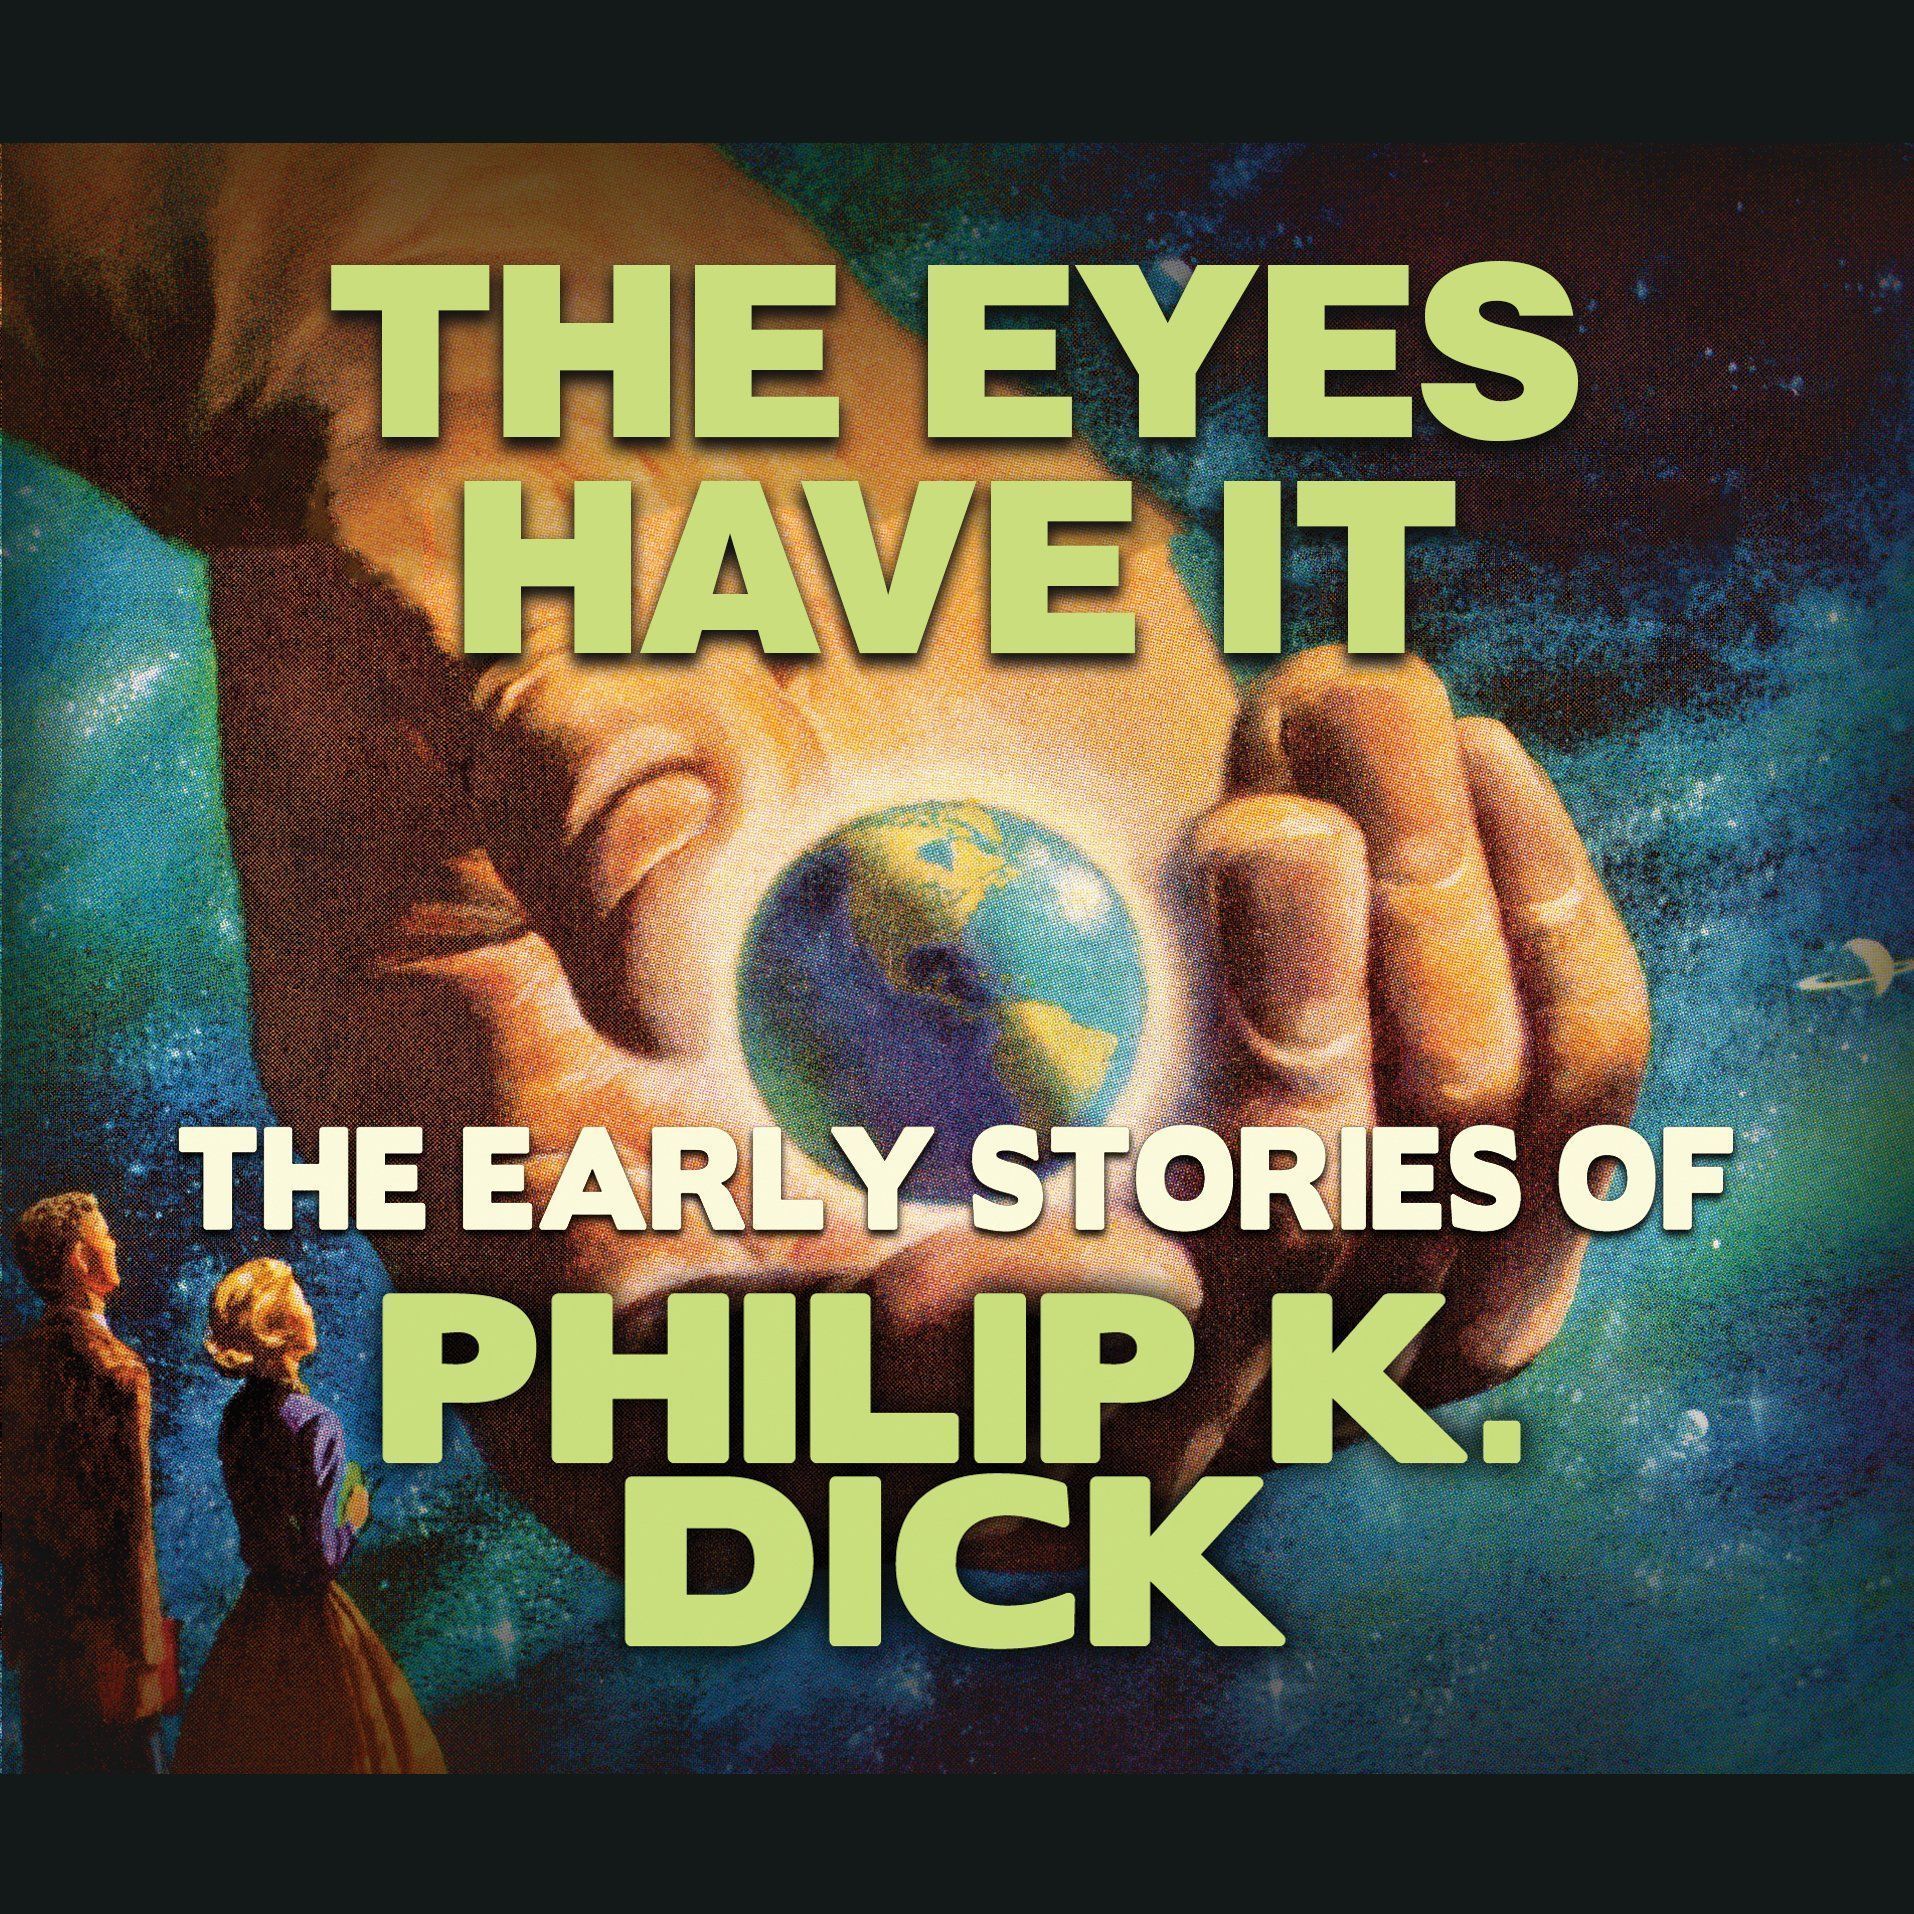 best of See Have with cant dick story eye